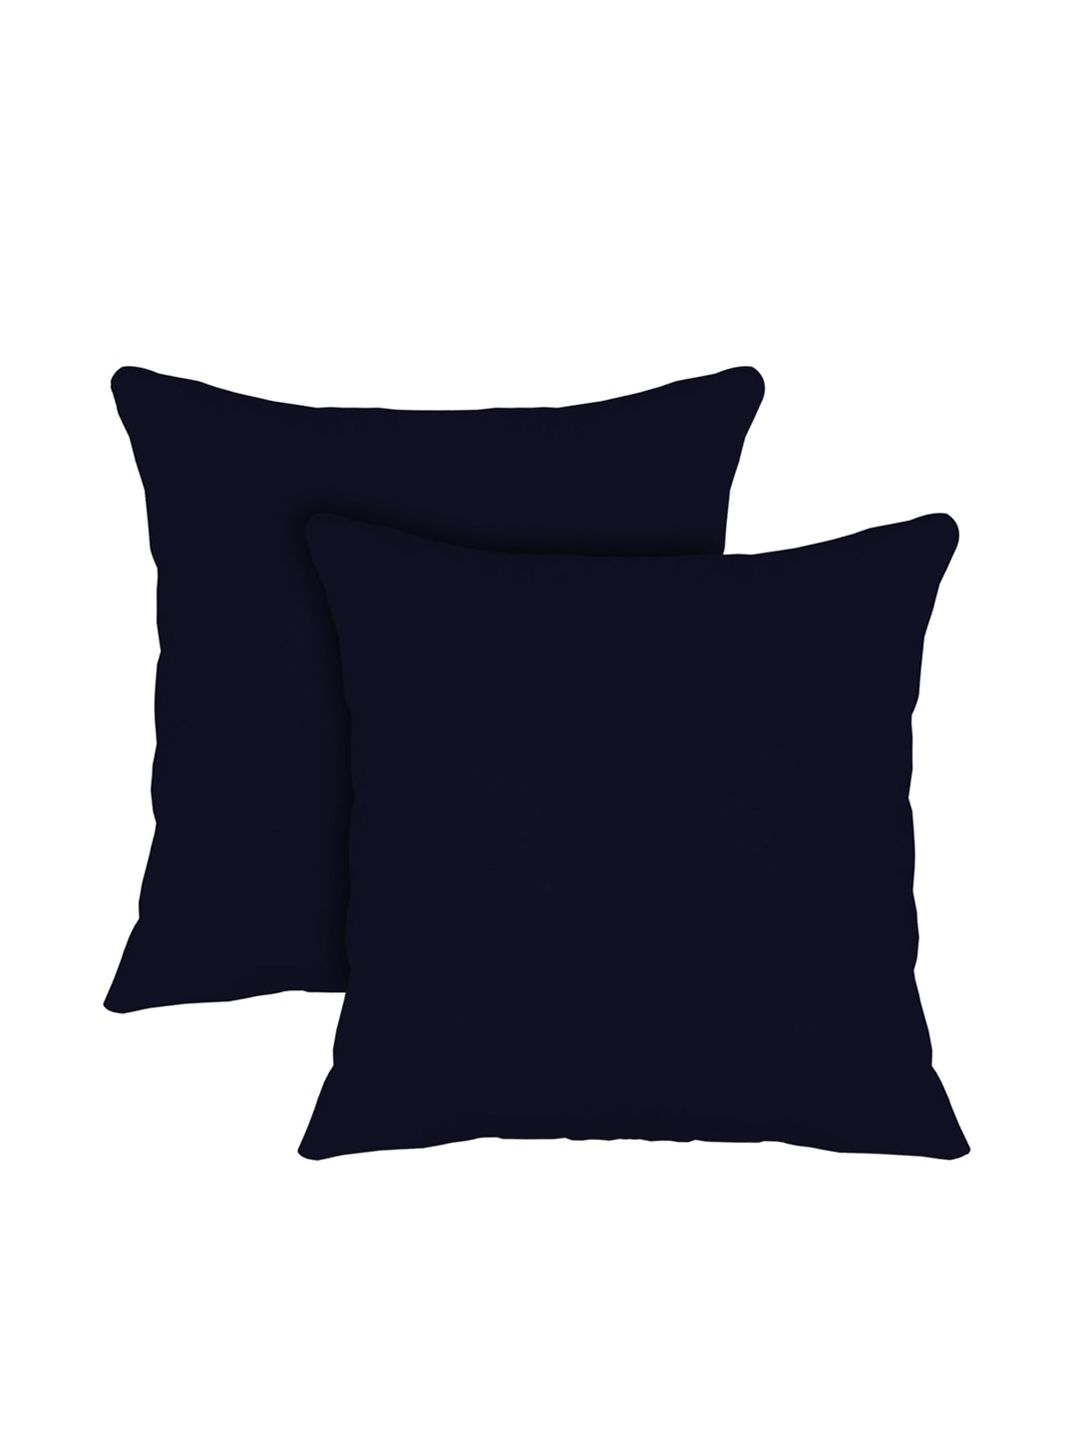 Kuber Industries Set Of 2 Navy Blue Solid Microfiber Filled Floor Cushions Price in India